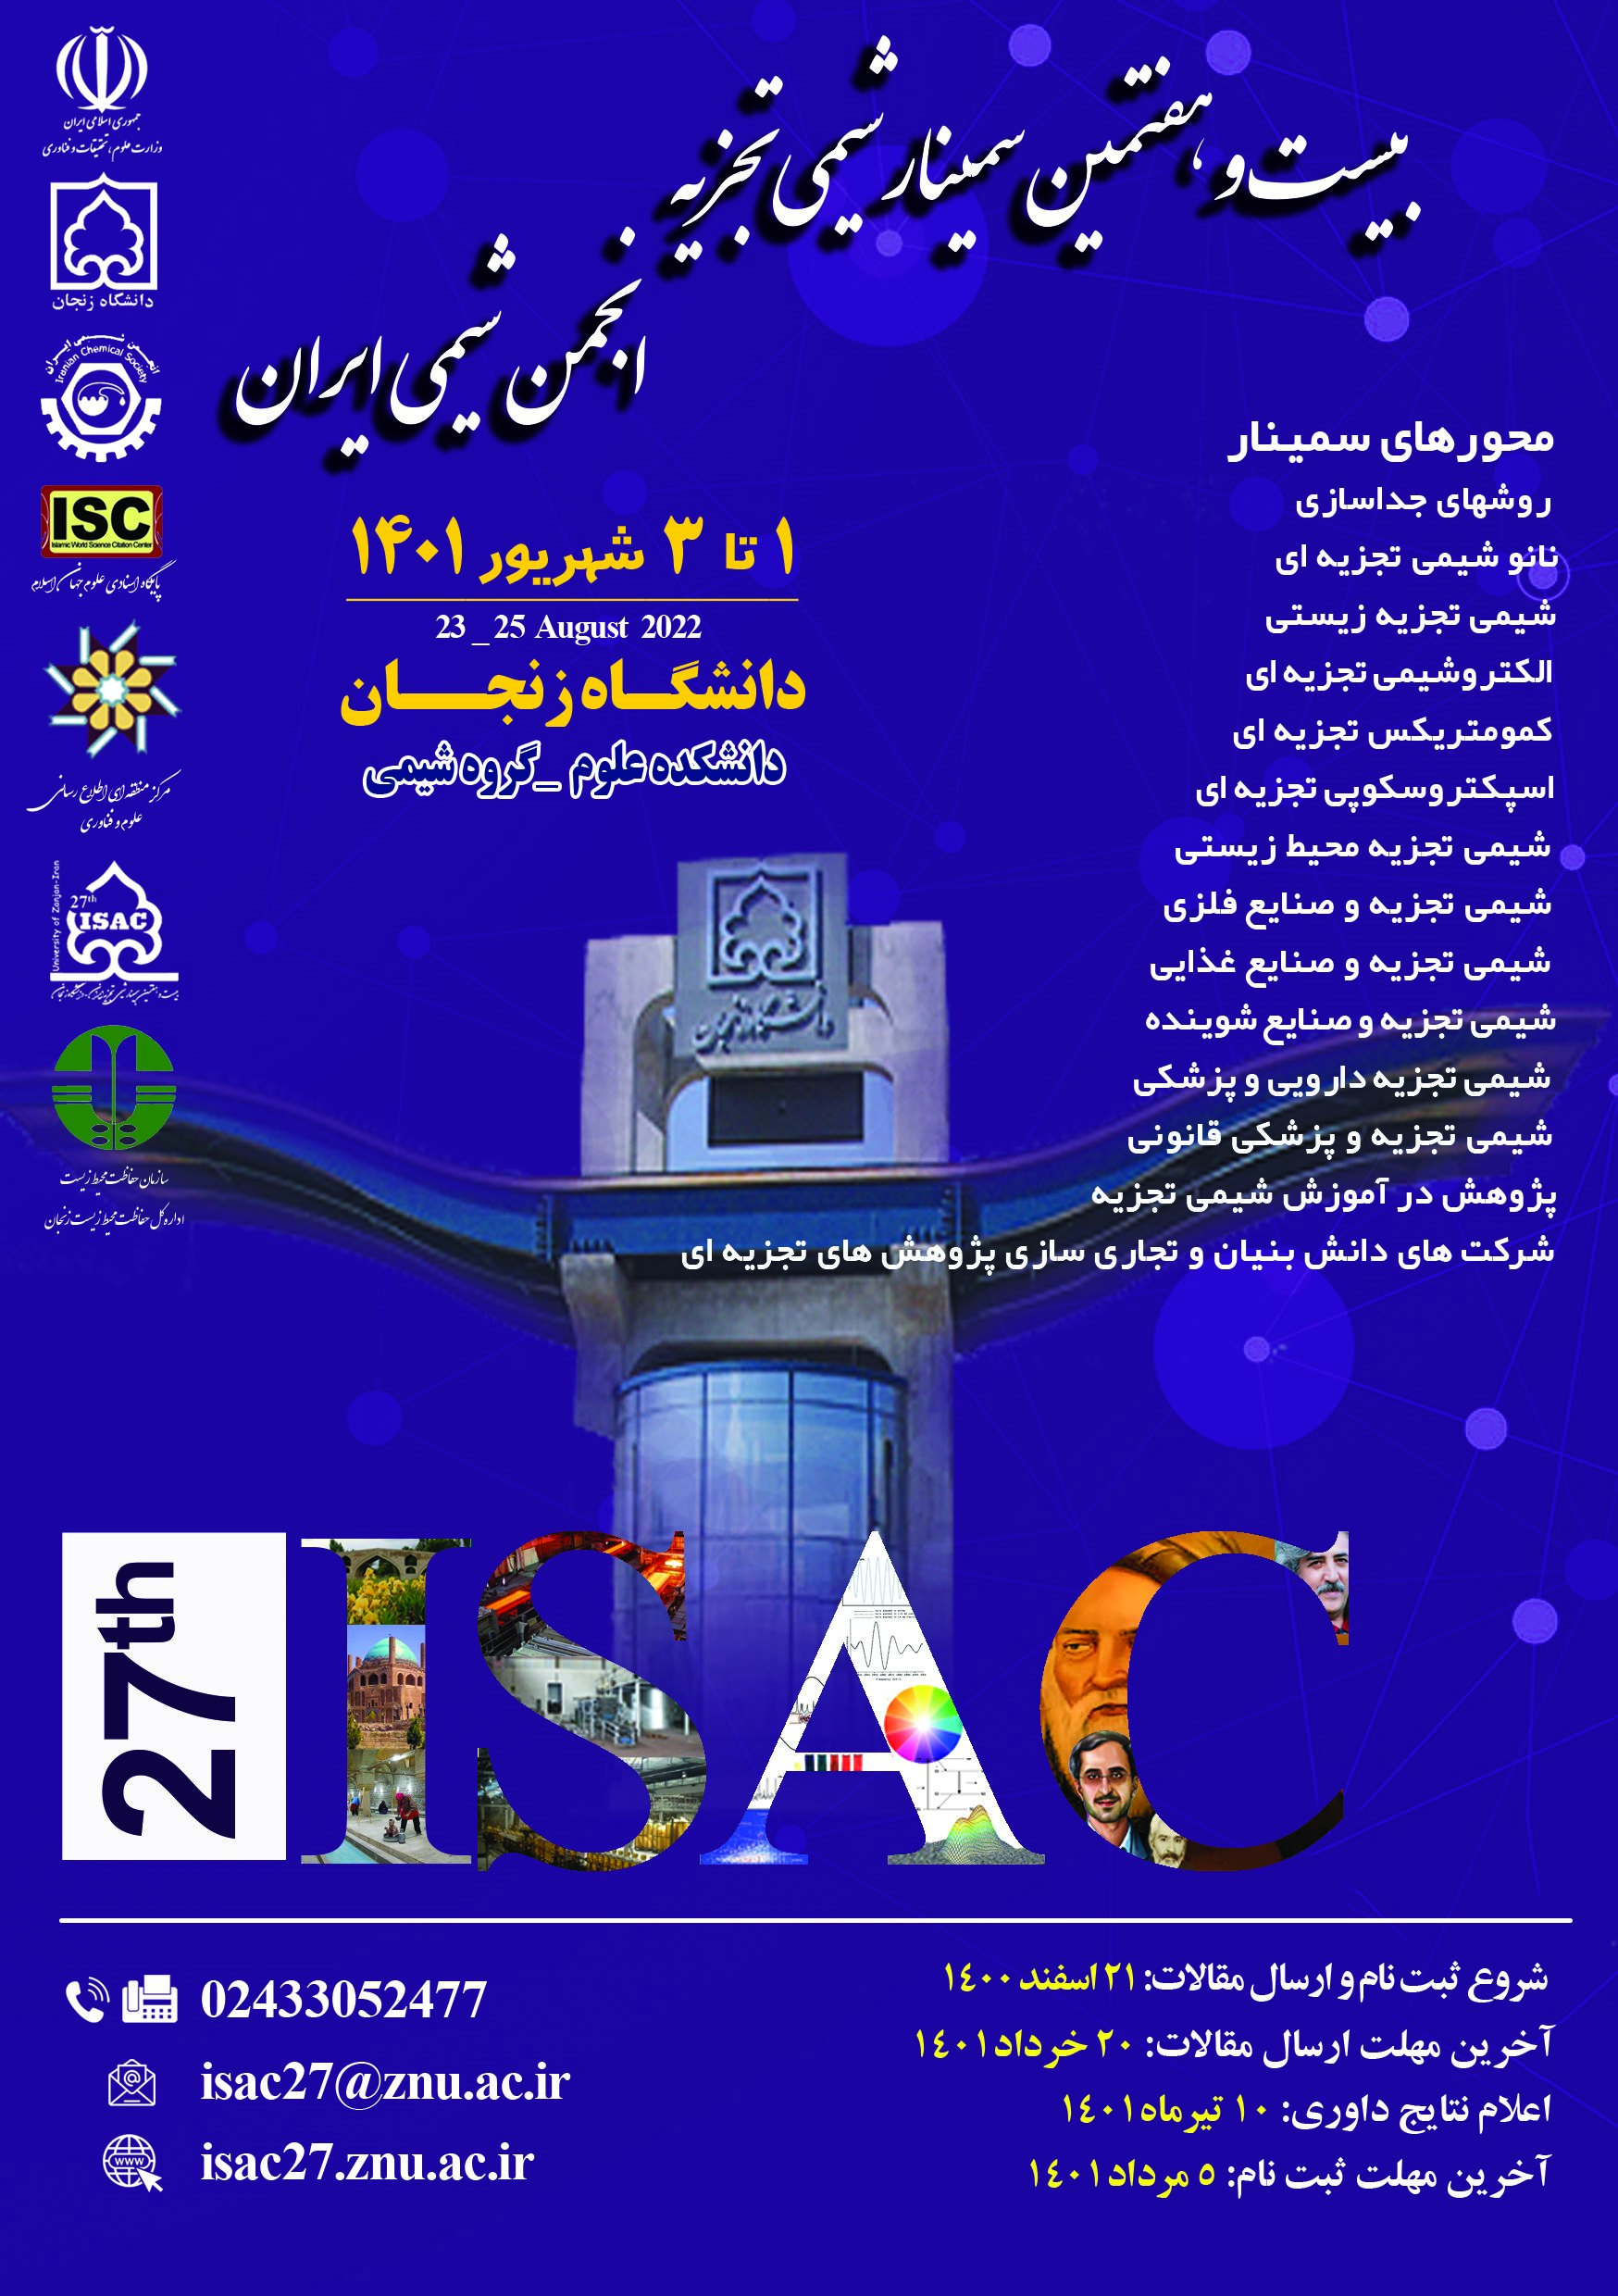 The 27th Analytical Chemistry Seminar of the Iranian Chemical Society